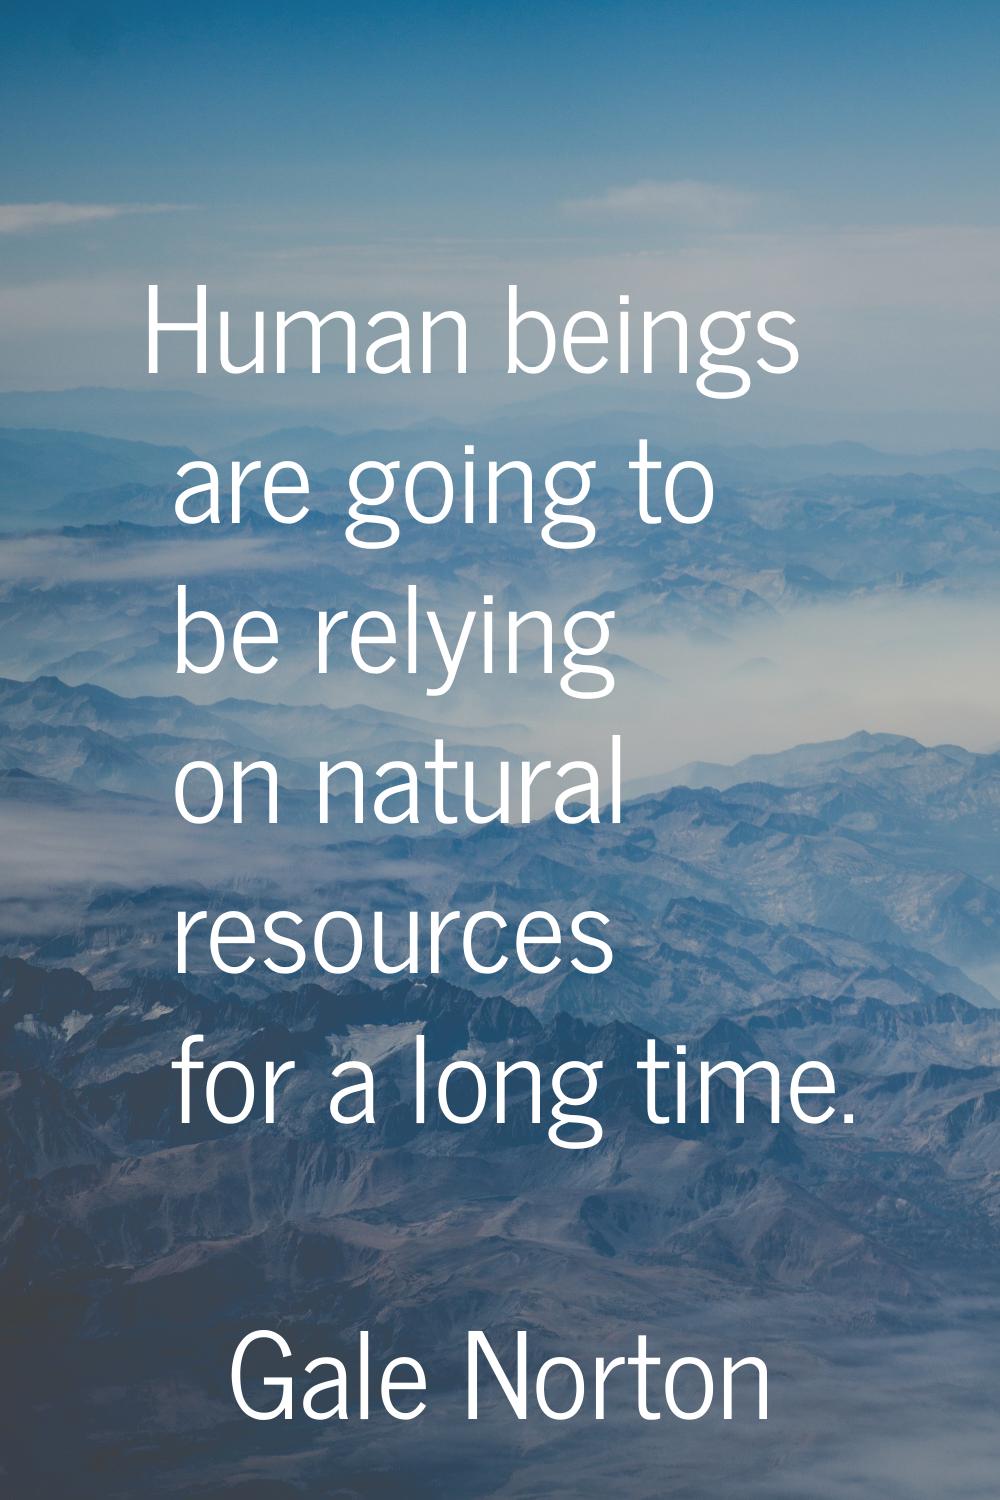 Human beings are going to be relying on natural resources for a long time.